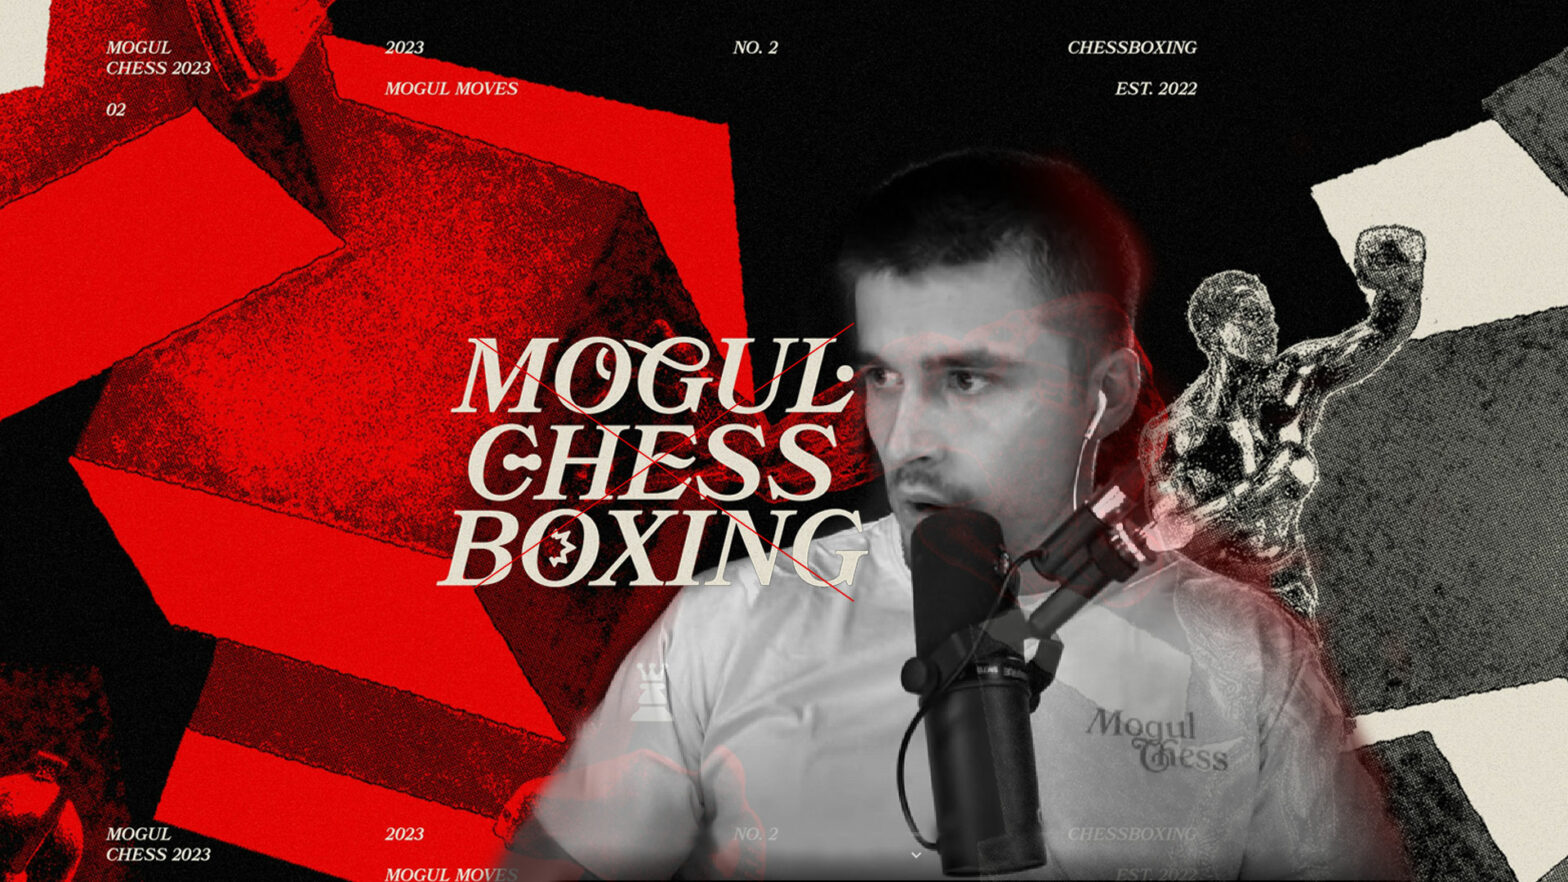 This is not on me, I did not inspire them - Ludwig reacts to fans hosting  Chess-Boxing event in abandoned warehouse